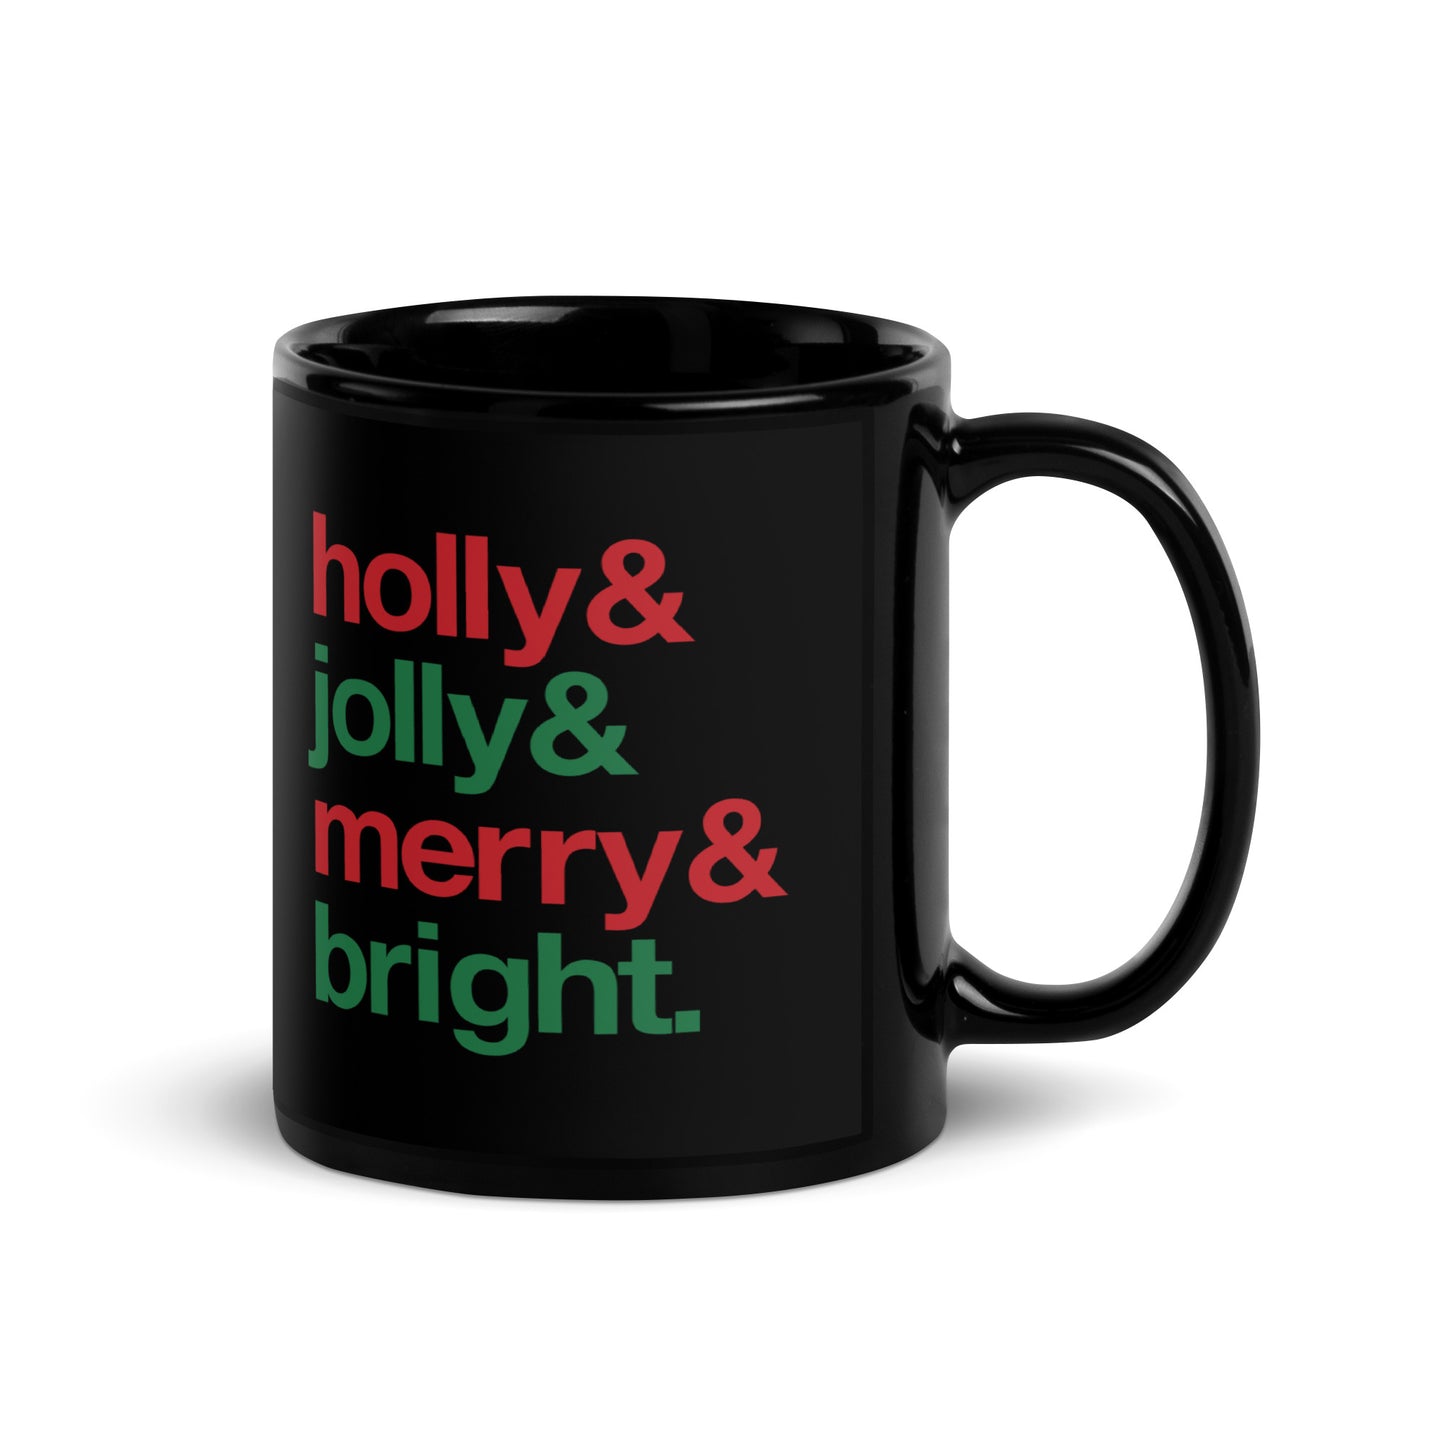 A black 11 ounce ceramic mug with four lines of red and green text that read "Holly & Jolly & Merry & Bright"